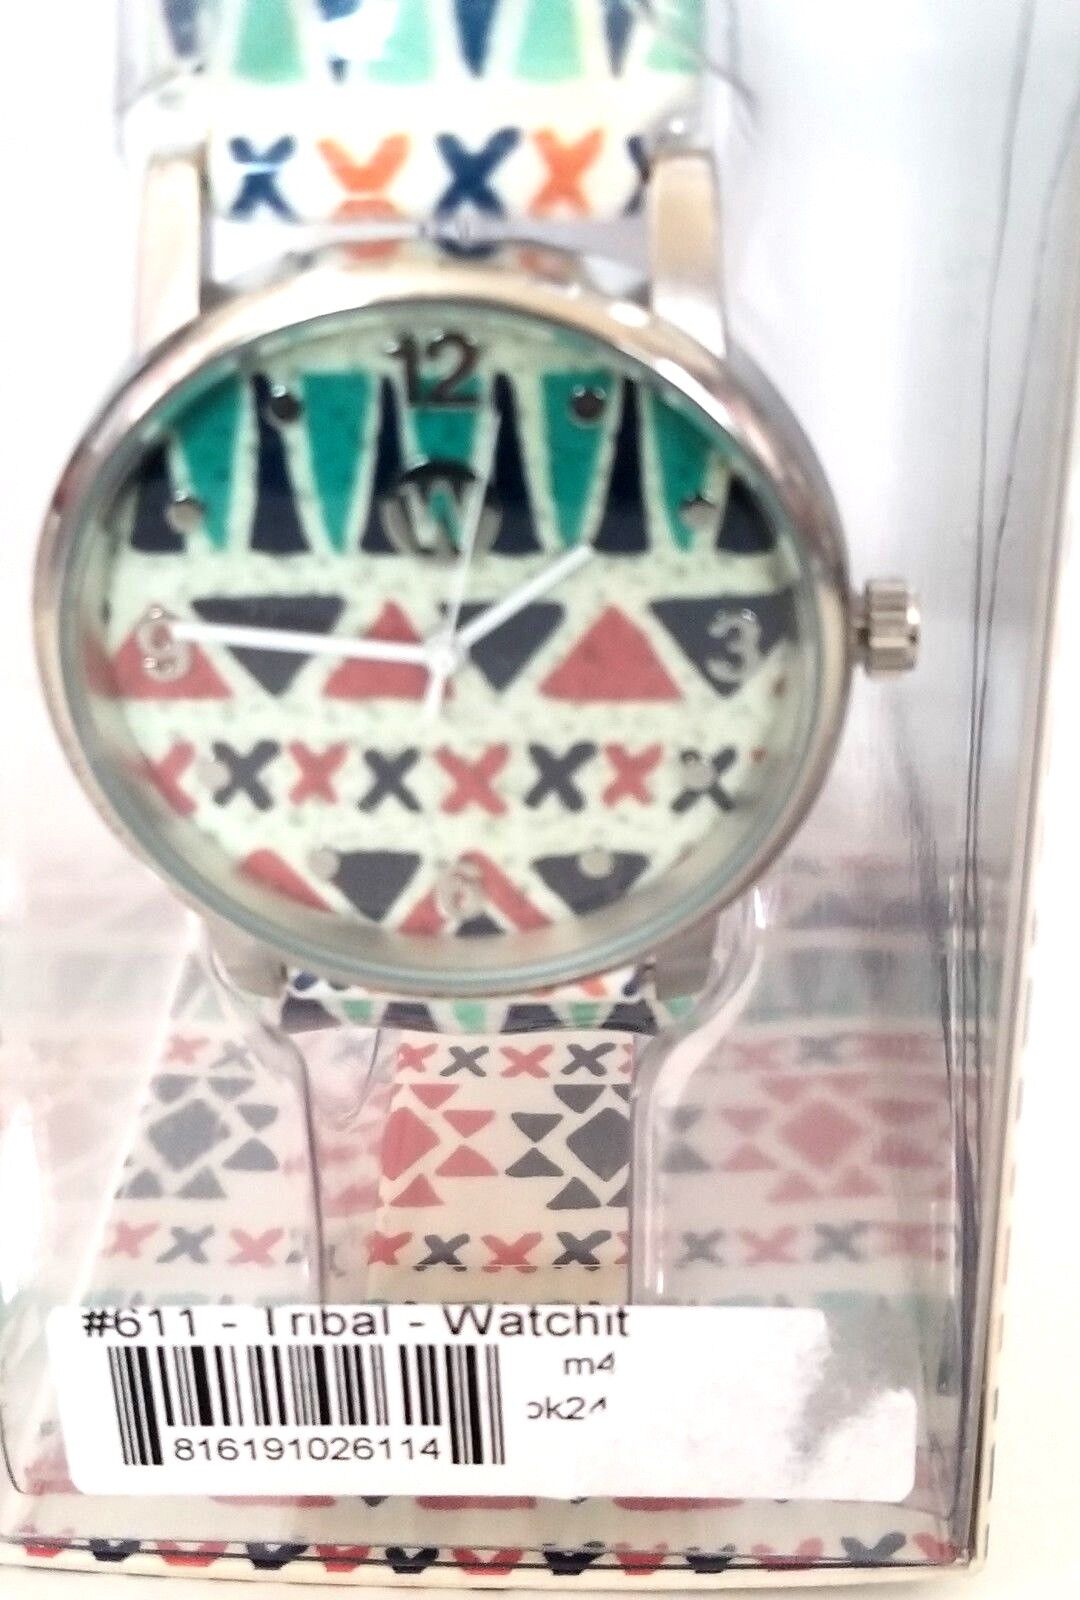 Watchitude Limited Edition Snap Watch - #611 TRIBAL NEW IN BOX SEALED.